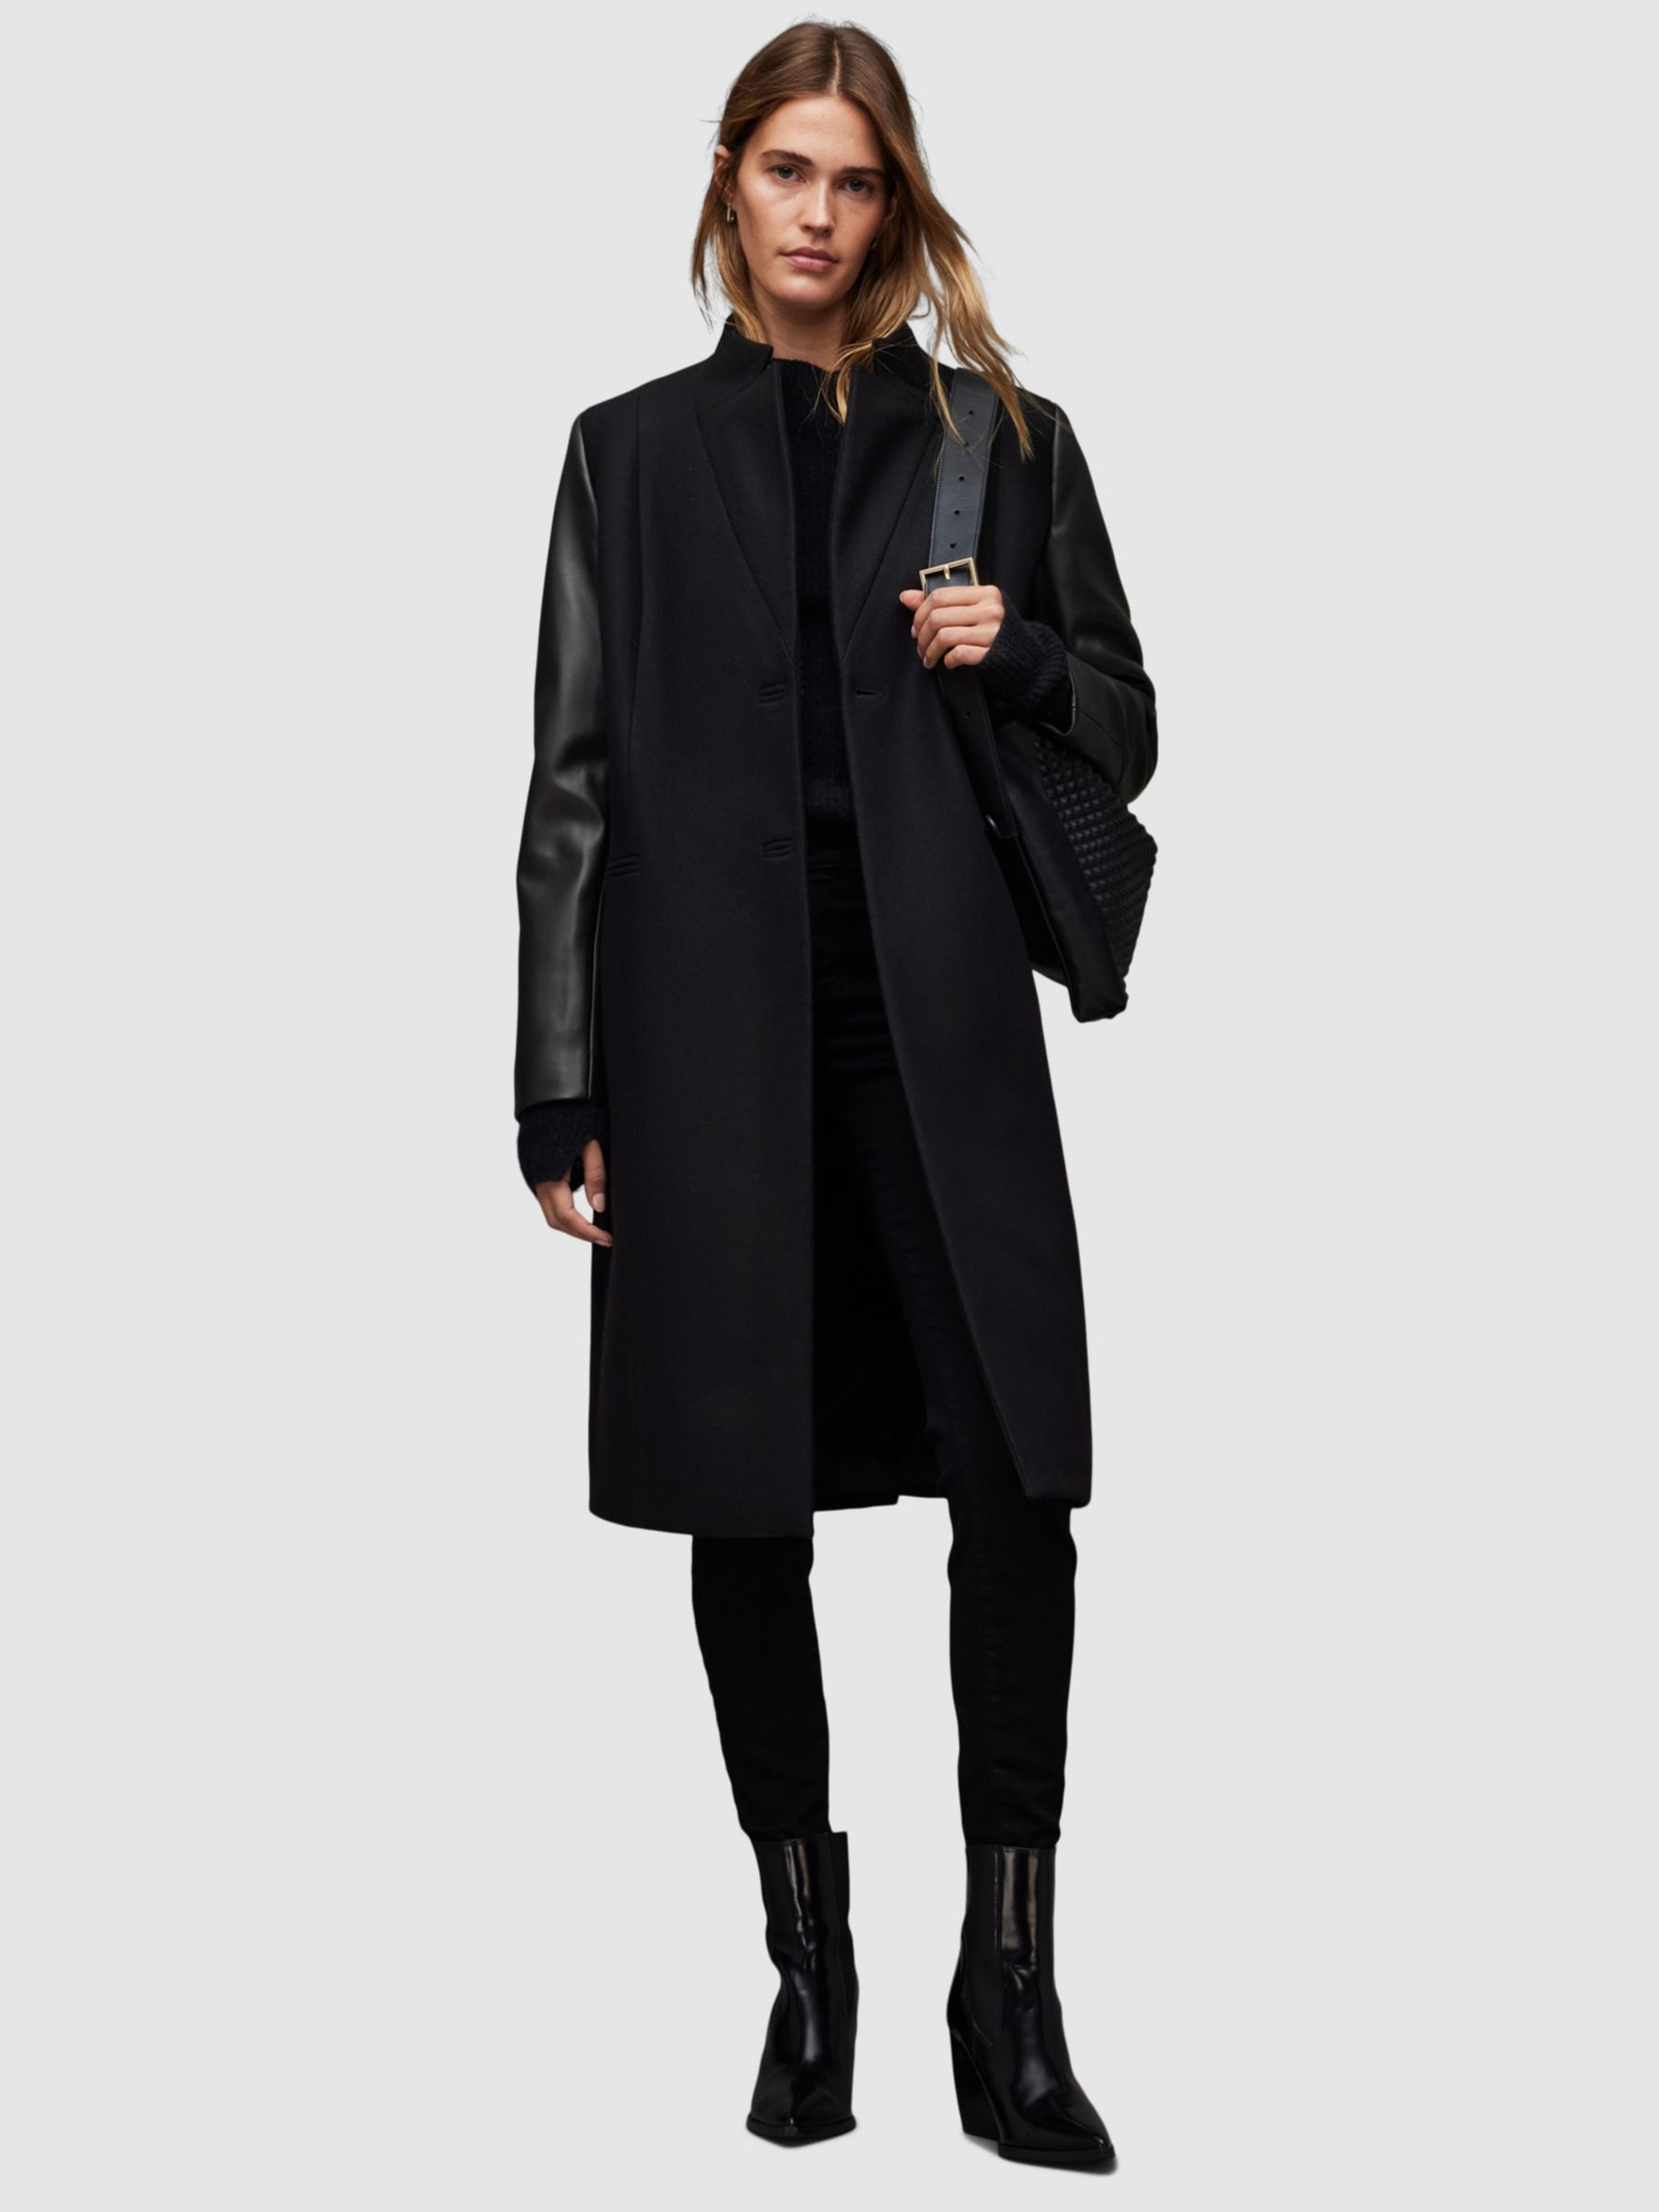 AllSaints Sidney Leather and Wool Coat, Black, 8